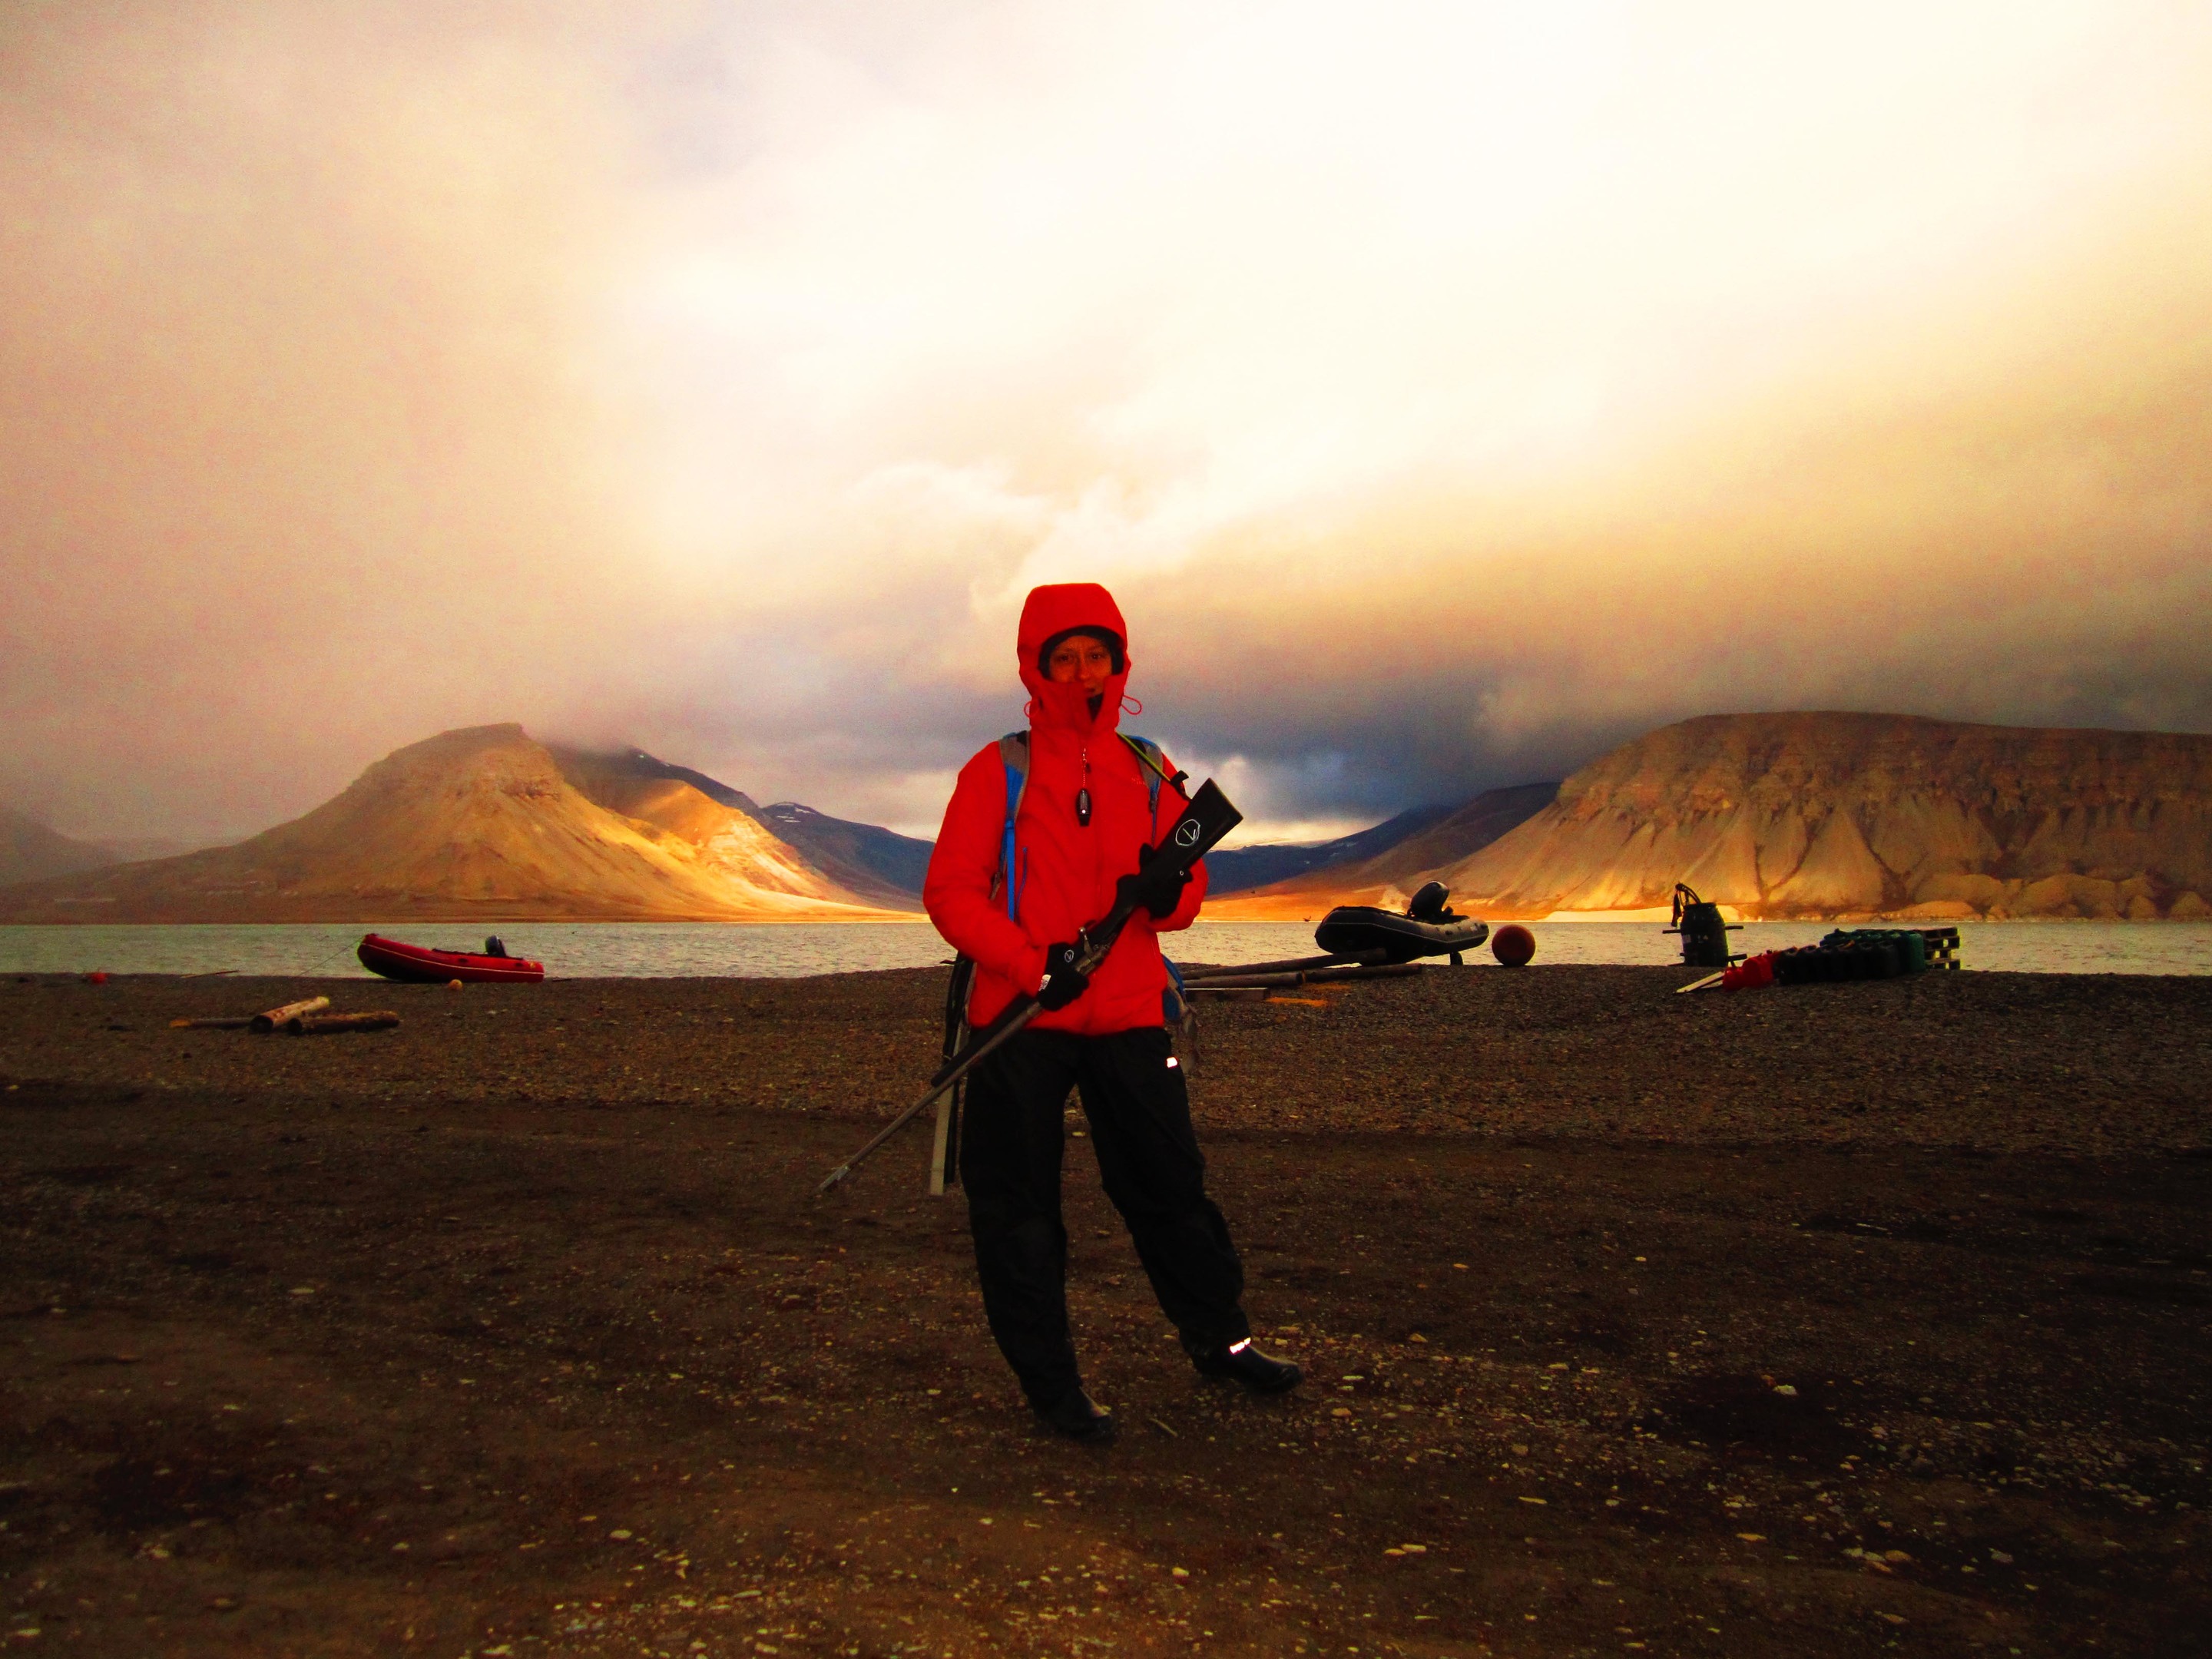 Georgia in Svalbard, armed to protect herself from polar bears